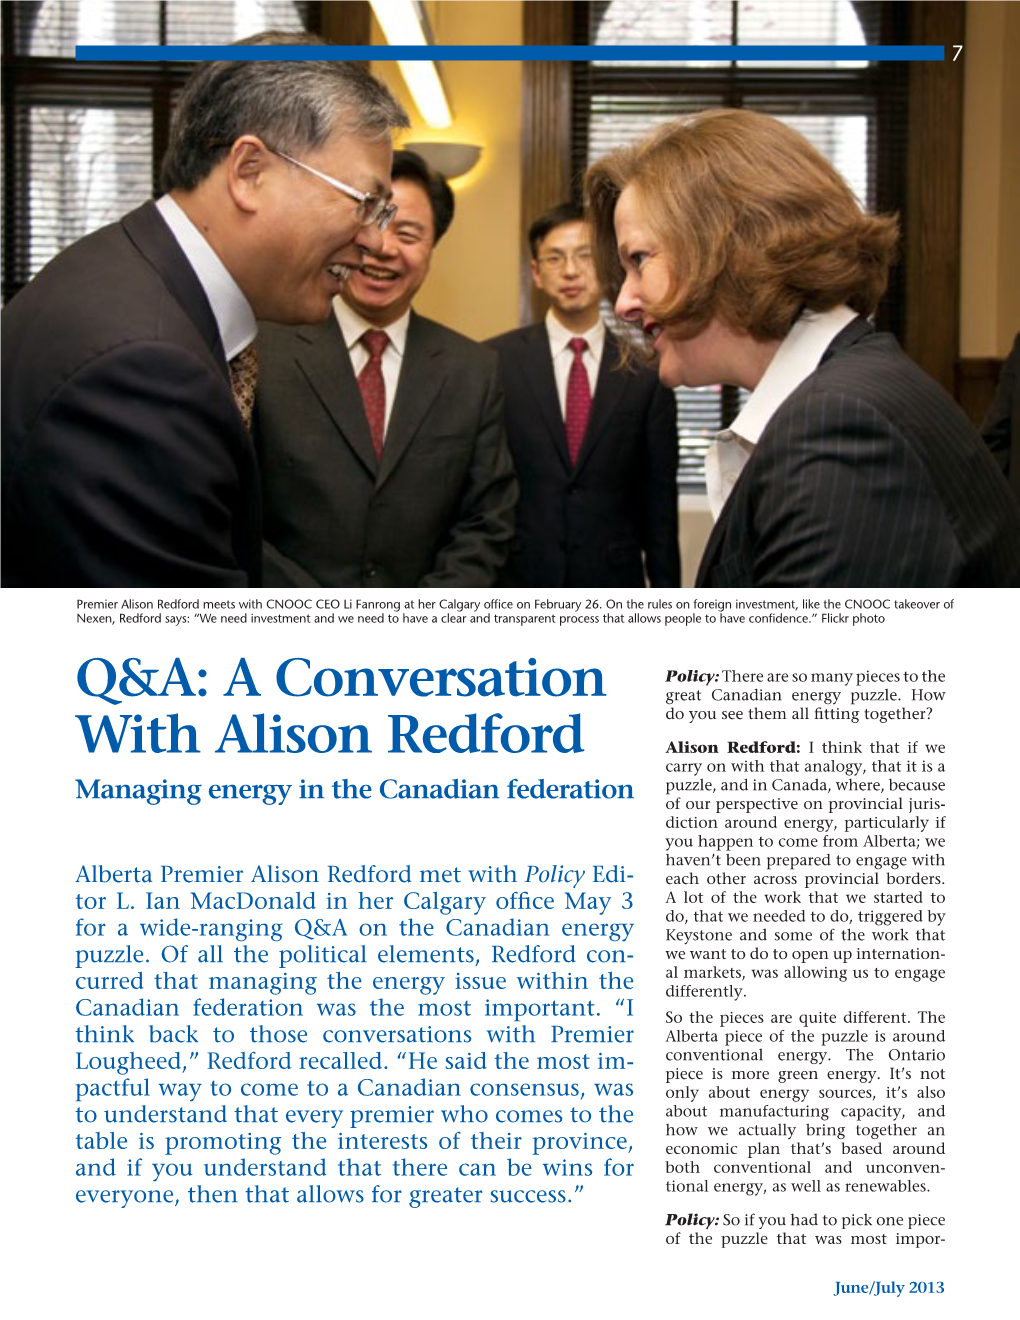 A Conversation with Alison Redford